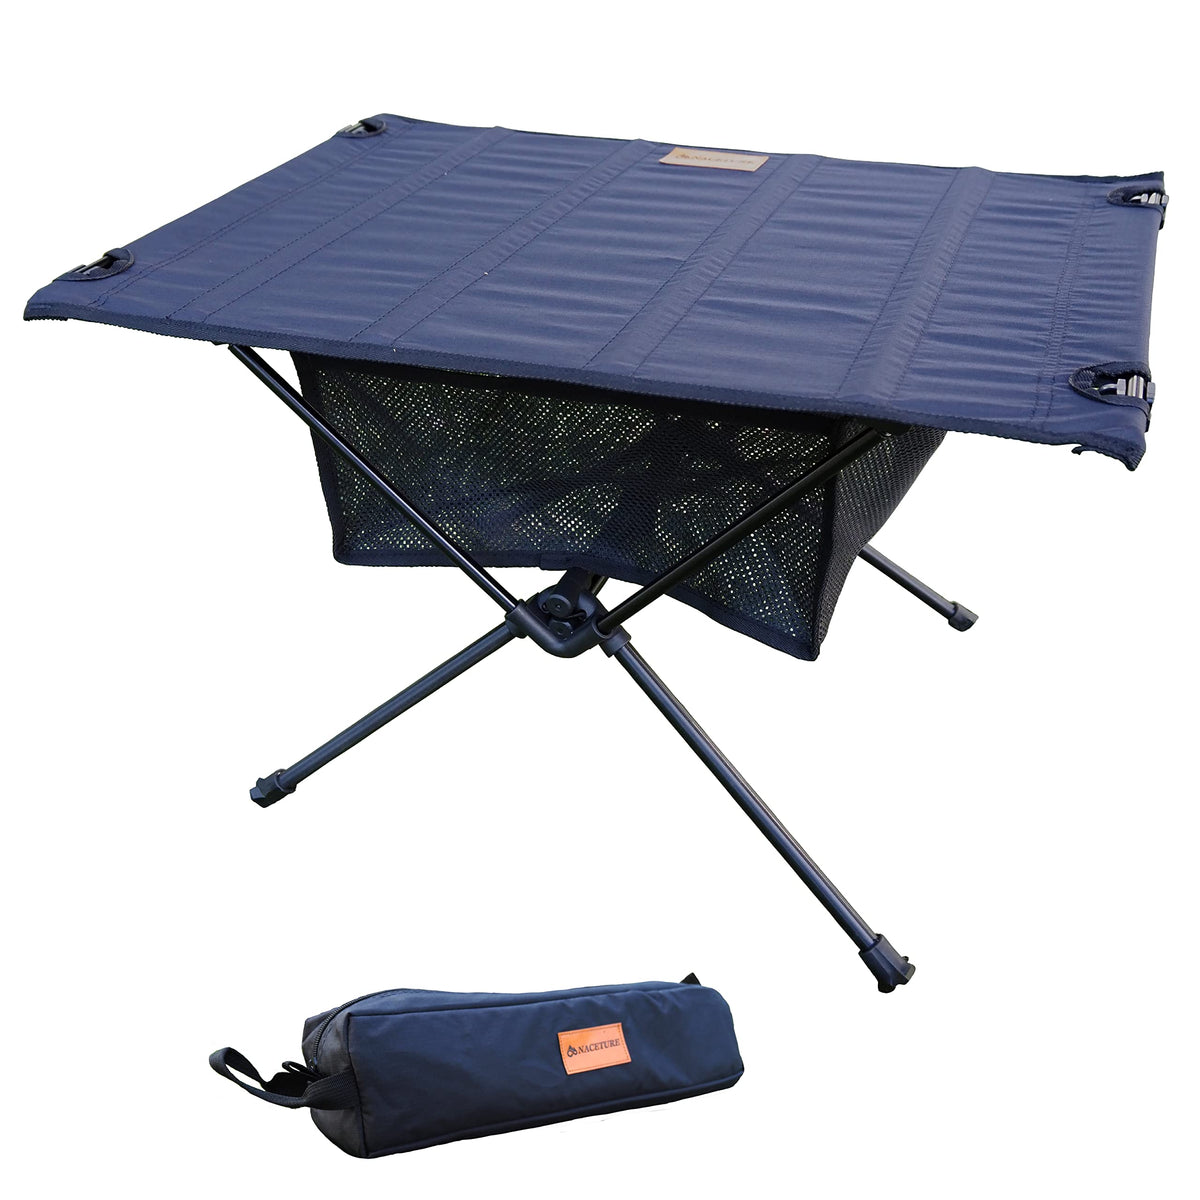 NACETURE Ultralight Backpacking Table - Collapsible Camping Table with Storage Mesh for Camping Gear Accessories, Hiking, Mountaineering, Outdoor Travel